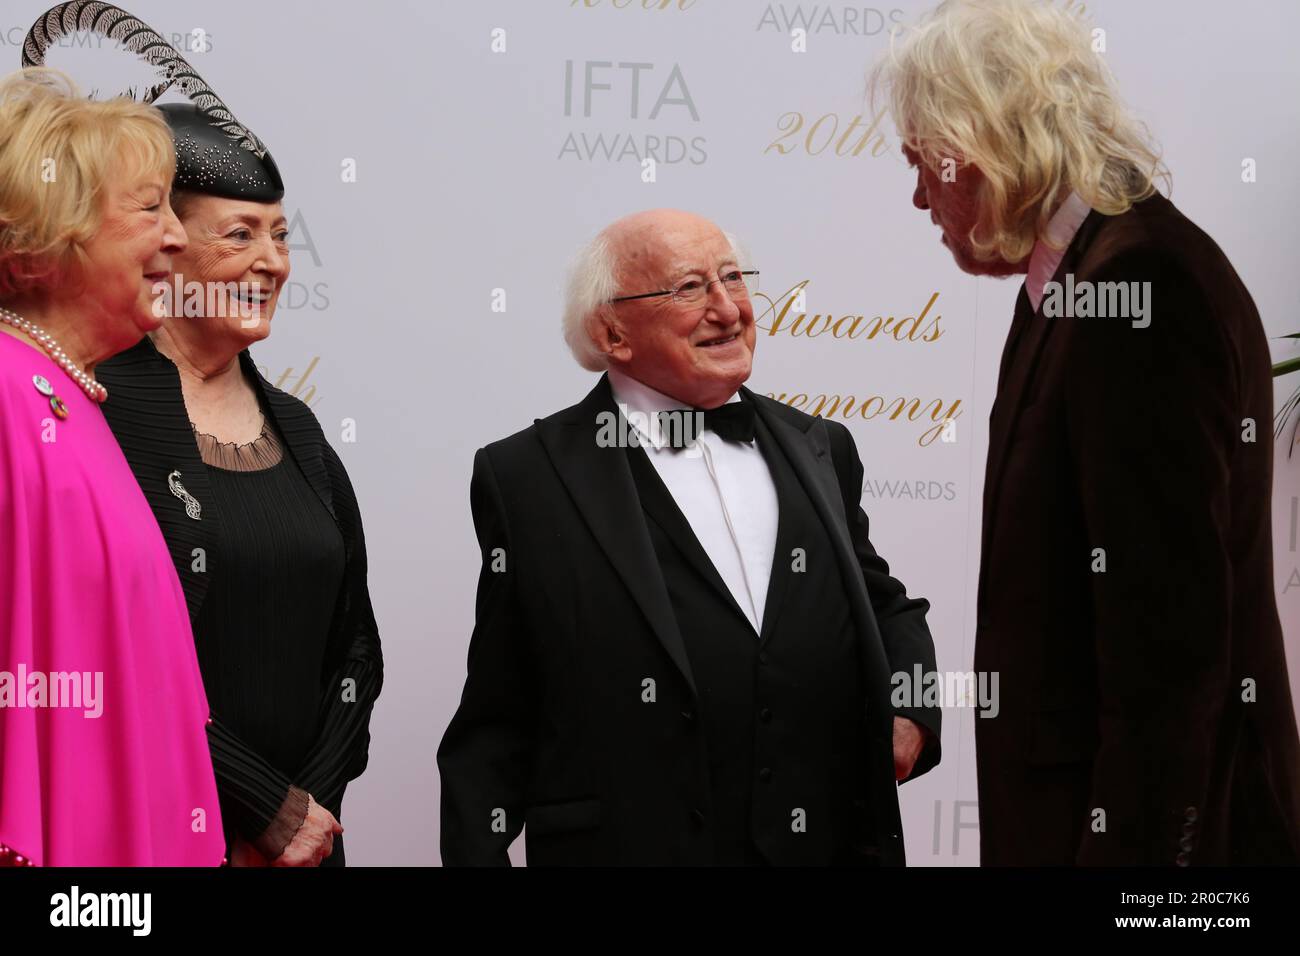 Dublin, Ireland. 7th May 2023. Sabina Higgins, Joan Bergin, President Michael D Higgins and Bob Geldof arriving on the red carpet at the Irish Film and Television Awards (IFTAs), Dublin Royal Convention Centre. Credit: Doreen Kennedy/Alamy Live News. Stock Photo